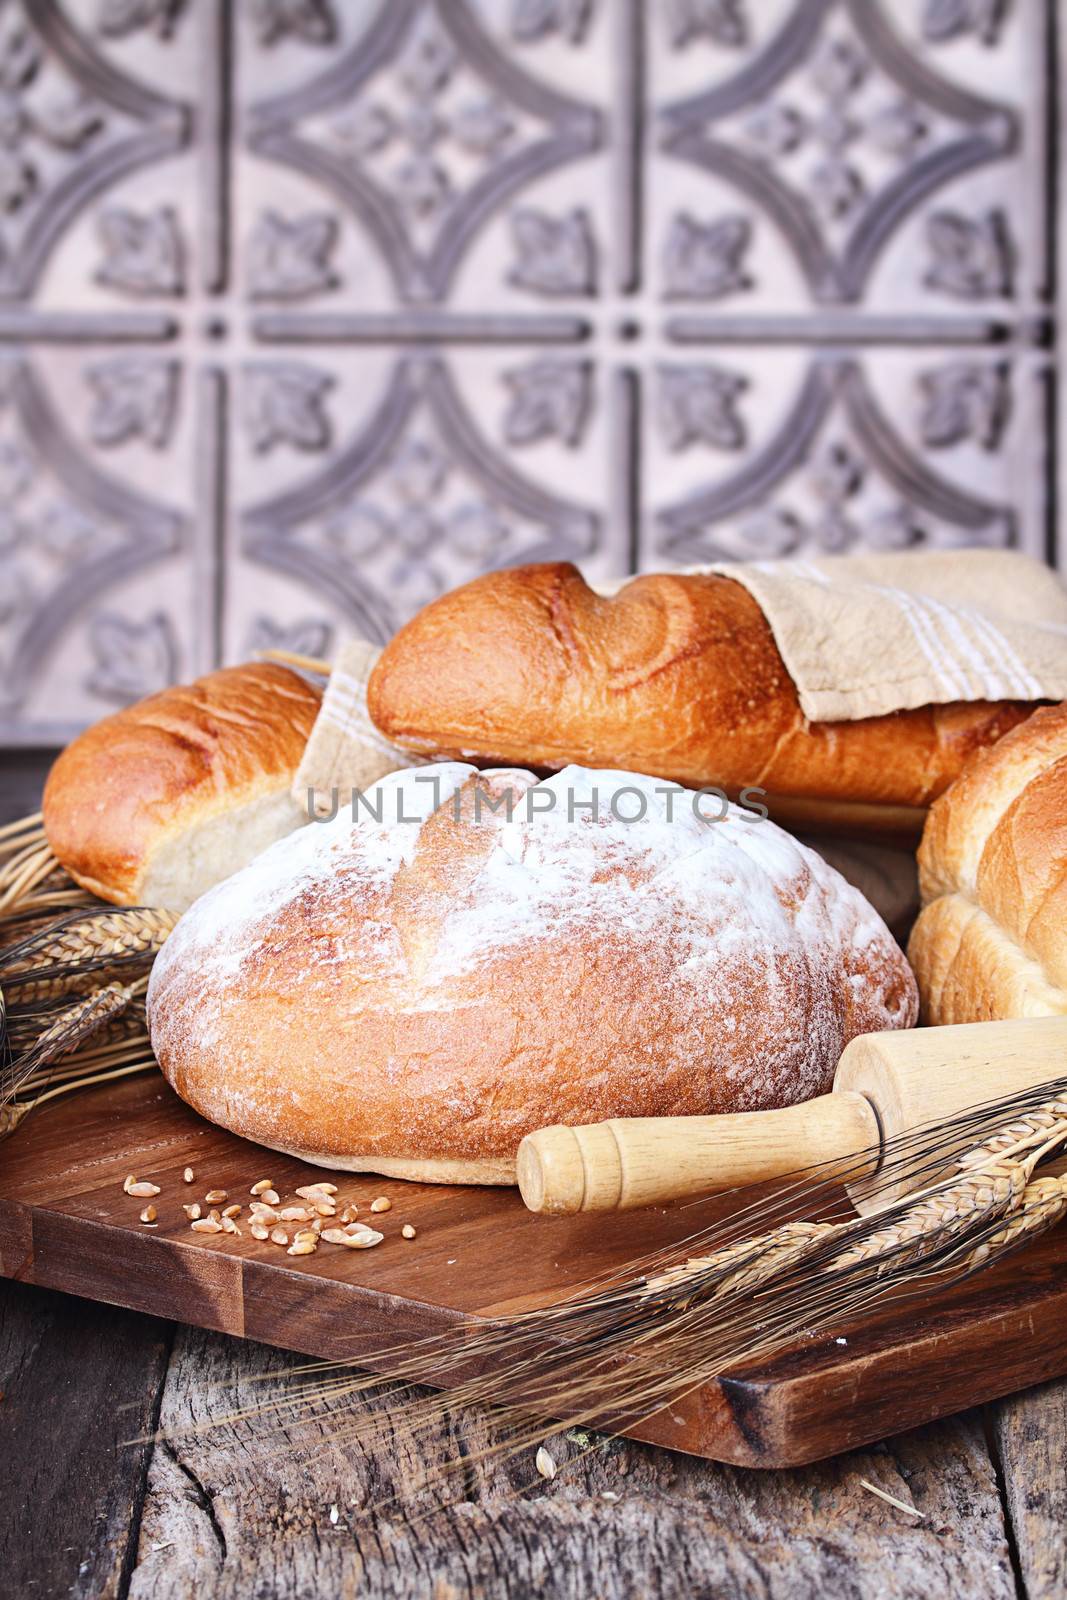 Variety of freshly baked breads and grain against a rustic background.